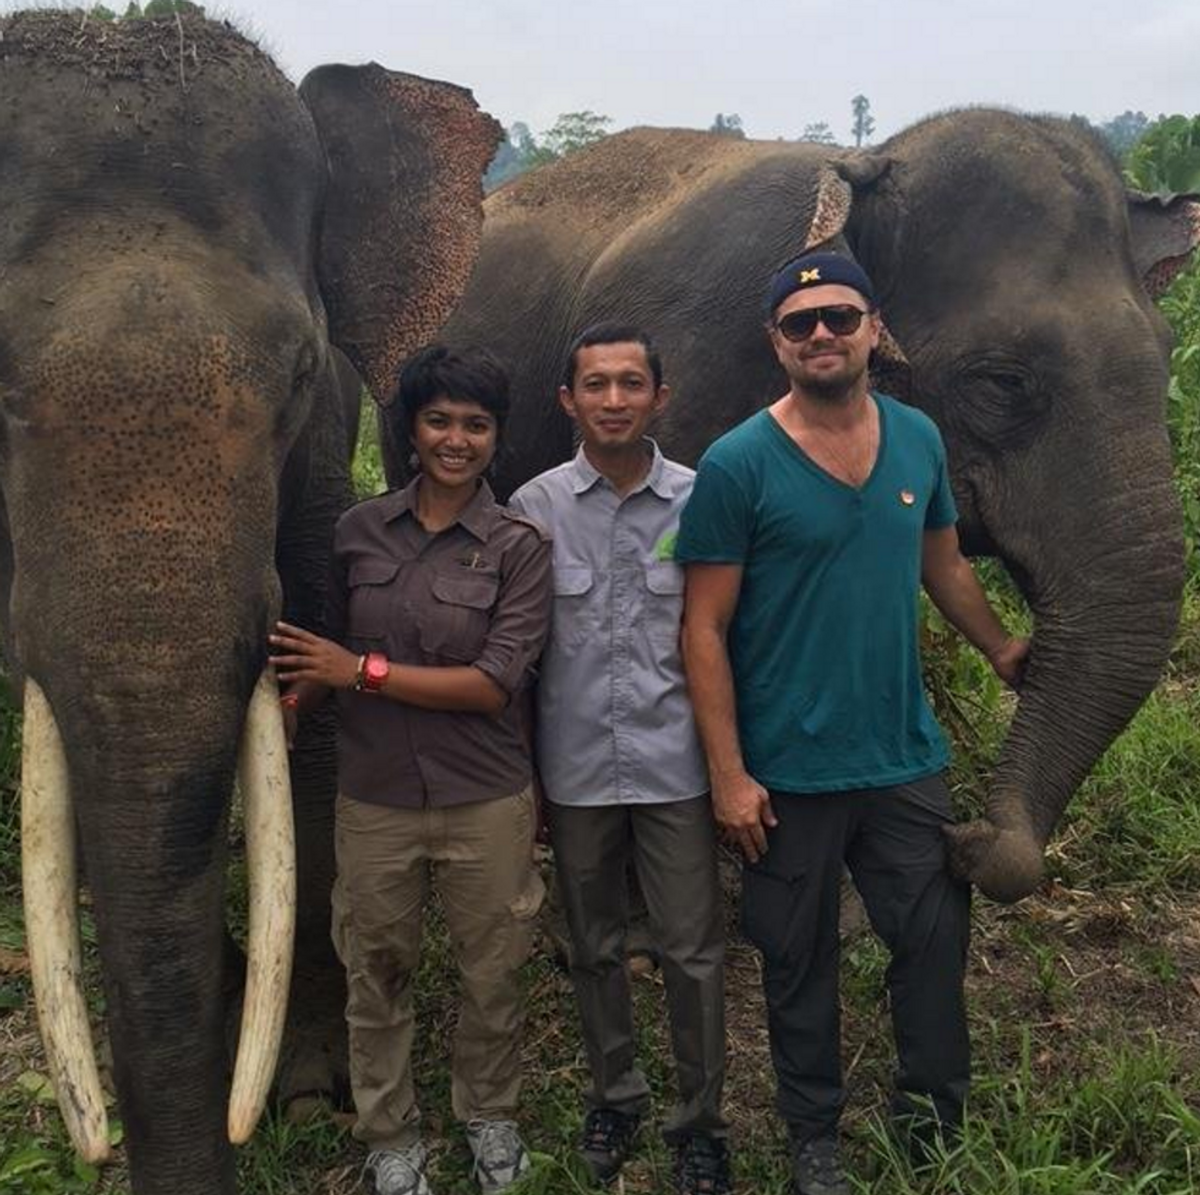 Leonardo DiCaprio Banned from Indonesia For Caring Too Much